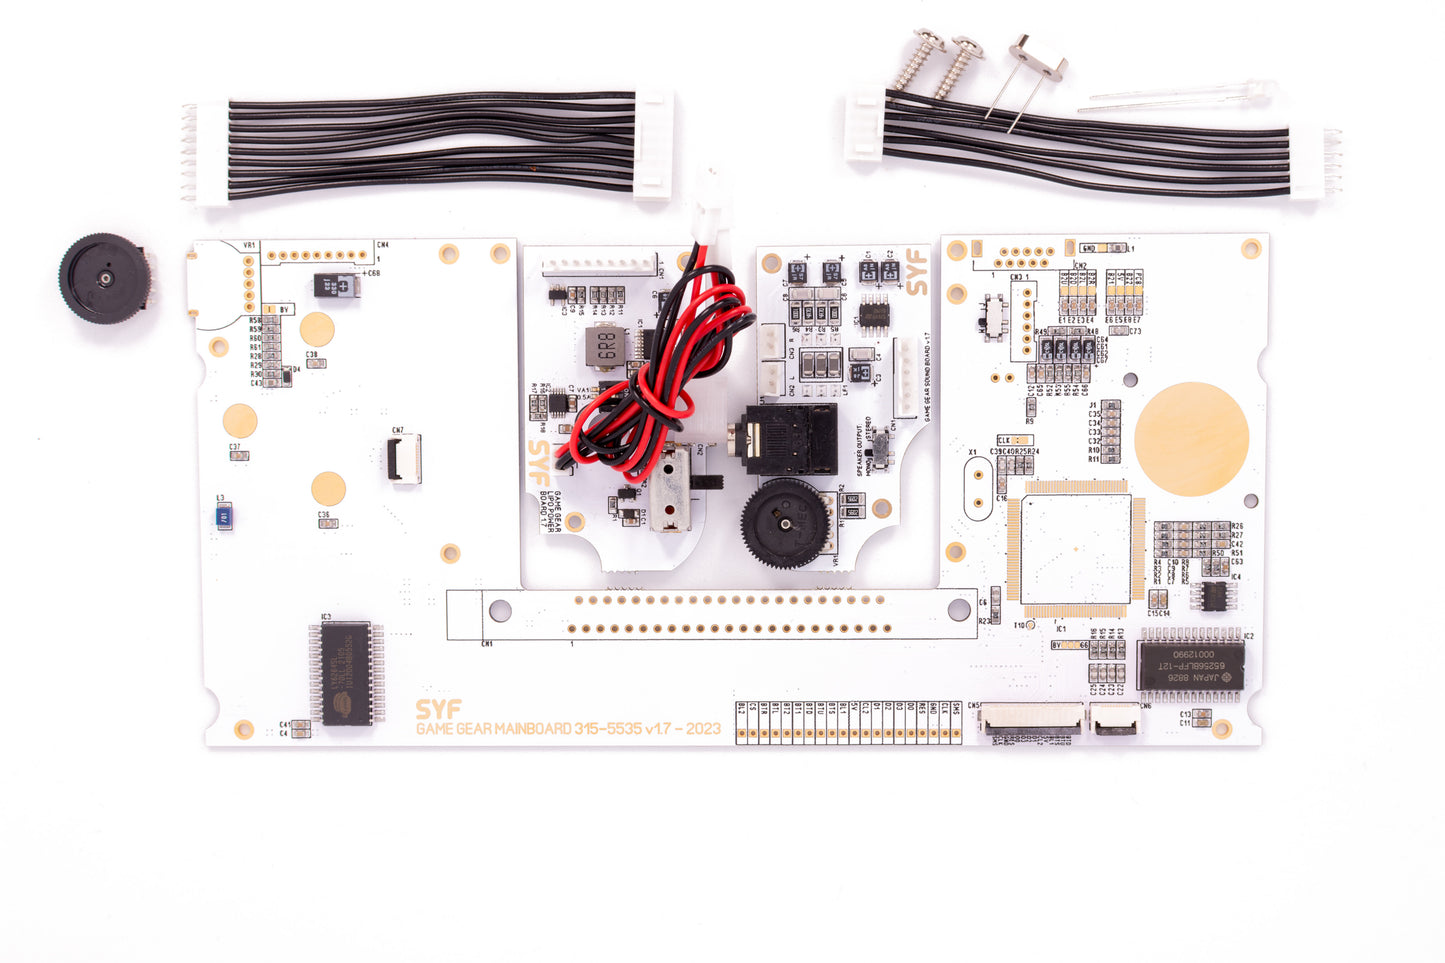 Game Gear Mainboard 315-5535 v1.7 - 3-in-1 kit